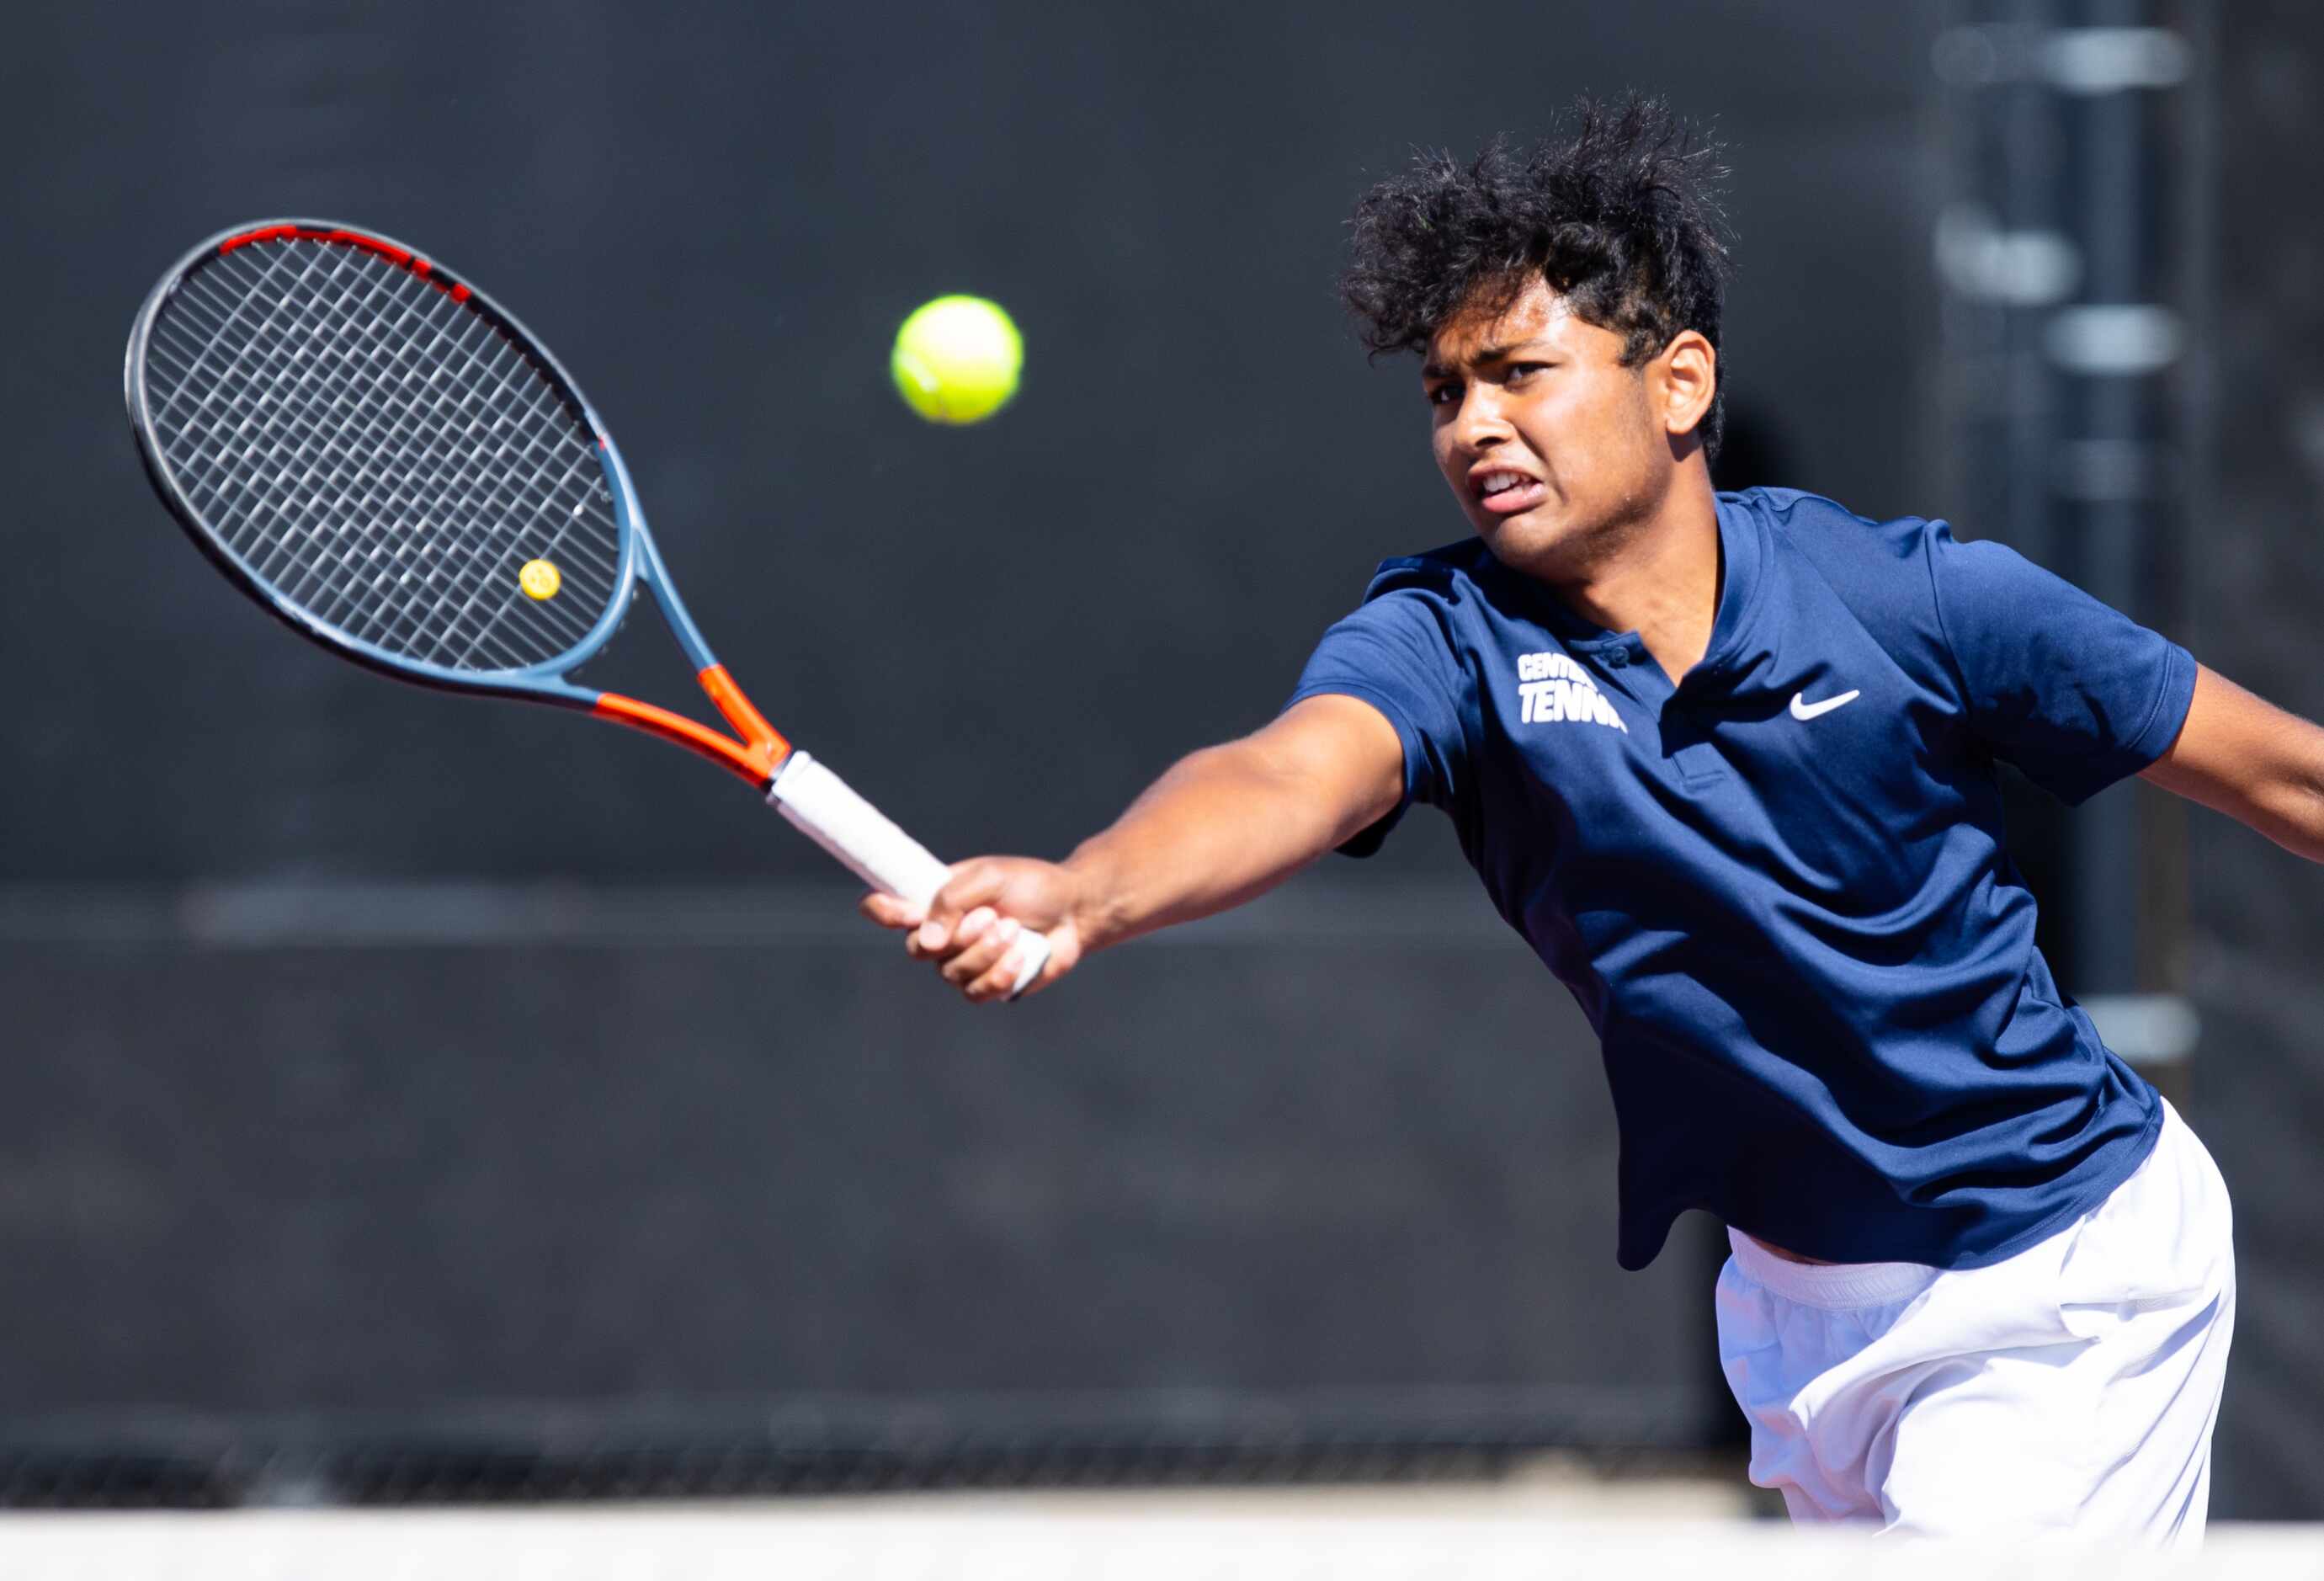 Frisco Centennial’s Rahul Muppavarapu returns a shot during a doubles match with partner...